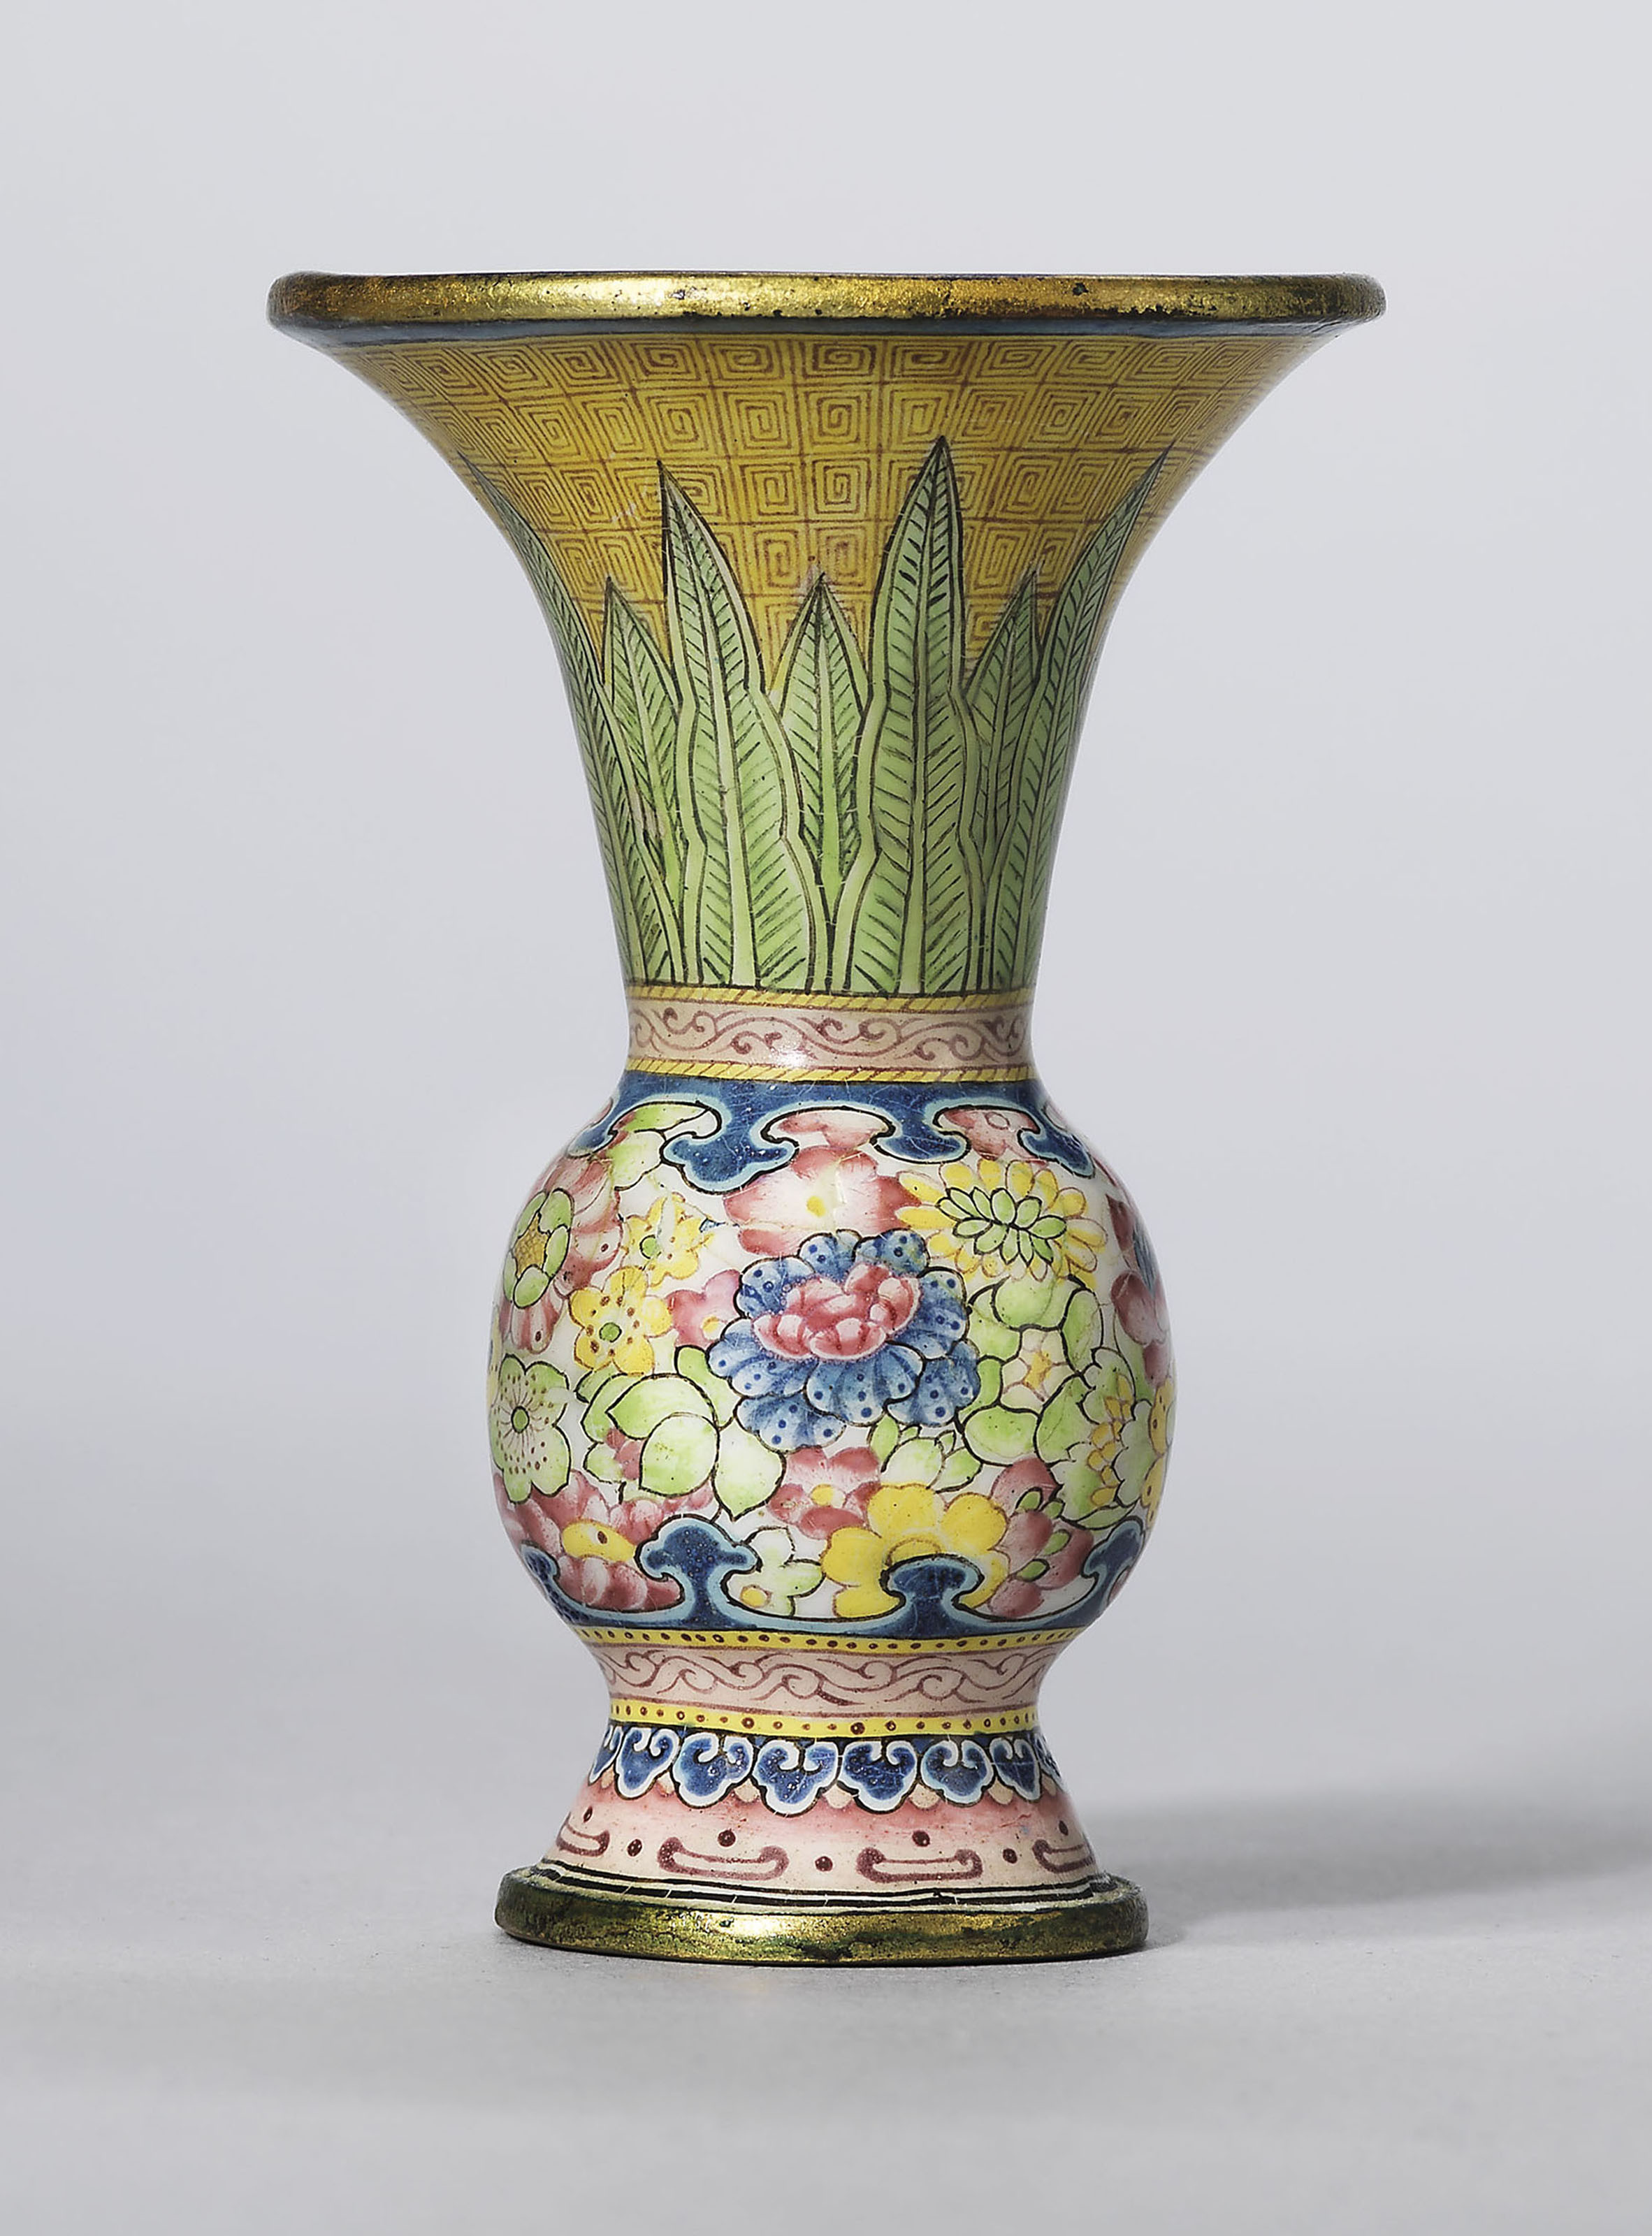 19 Perfect Silver Trumpet Vases for Sale 2024 free download silver trumpet vases for sale of a guide to the symbolism of flowers on chinese ceramics christies in a rare painted enamel gu shaped miniature vase qianlong four character mark in